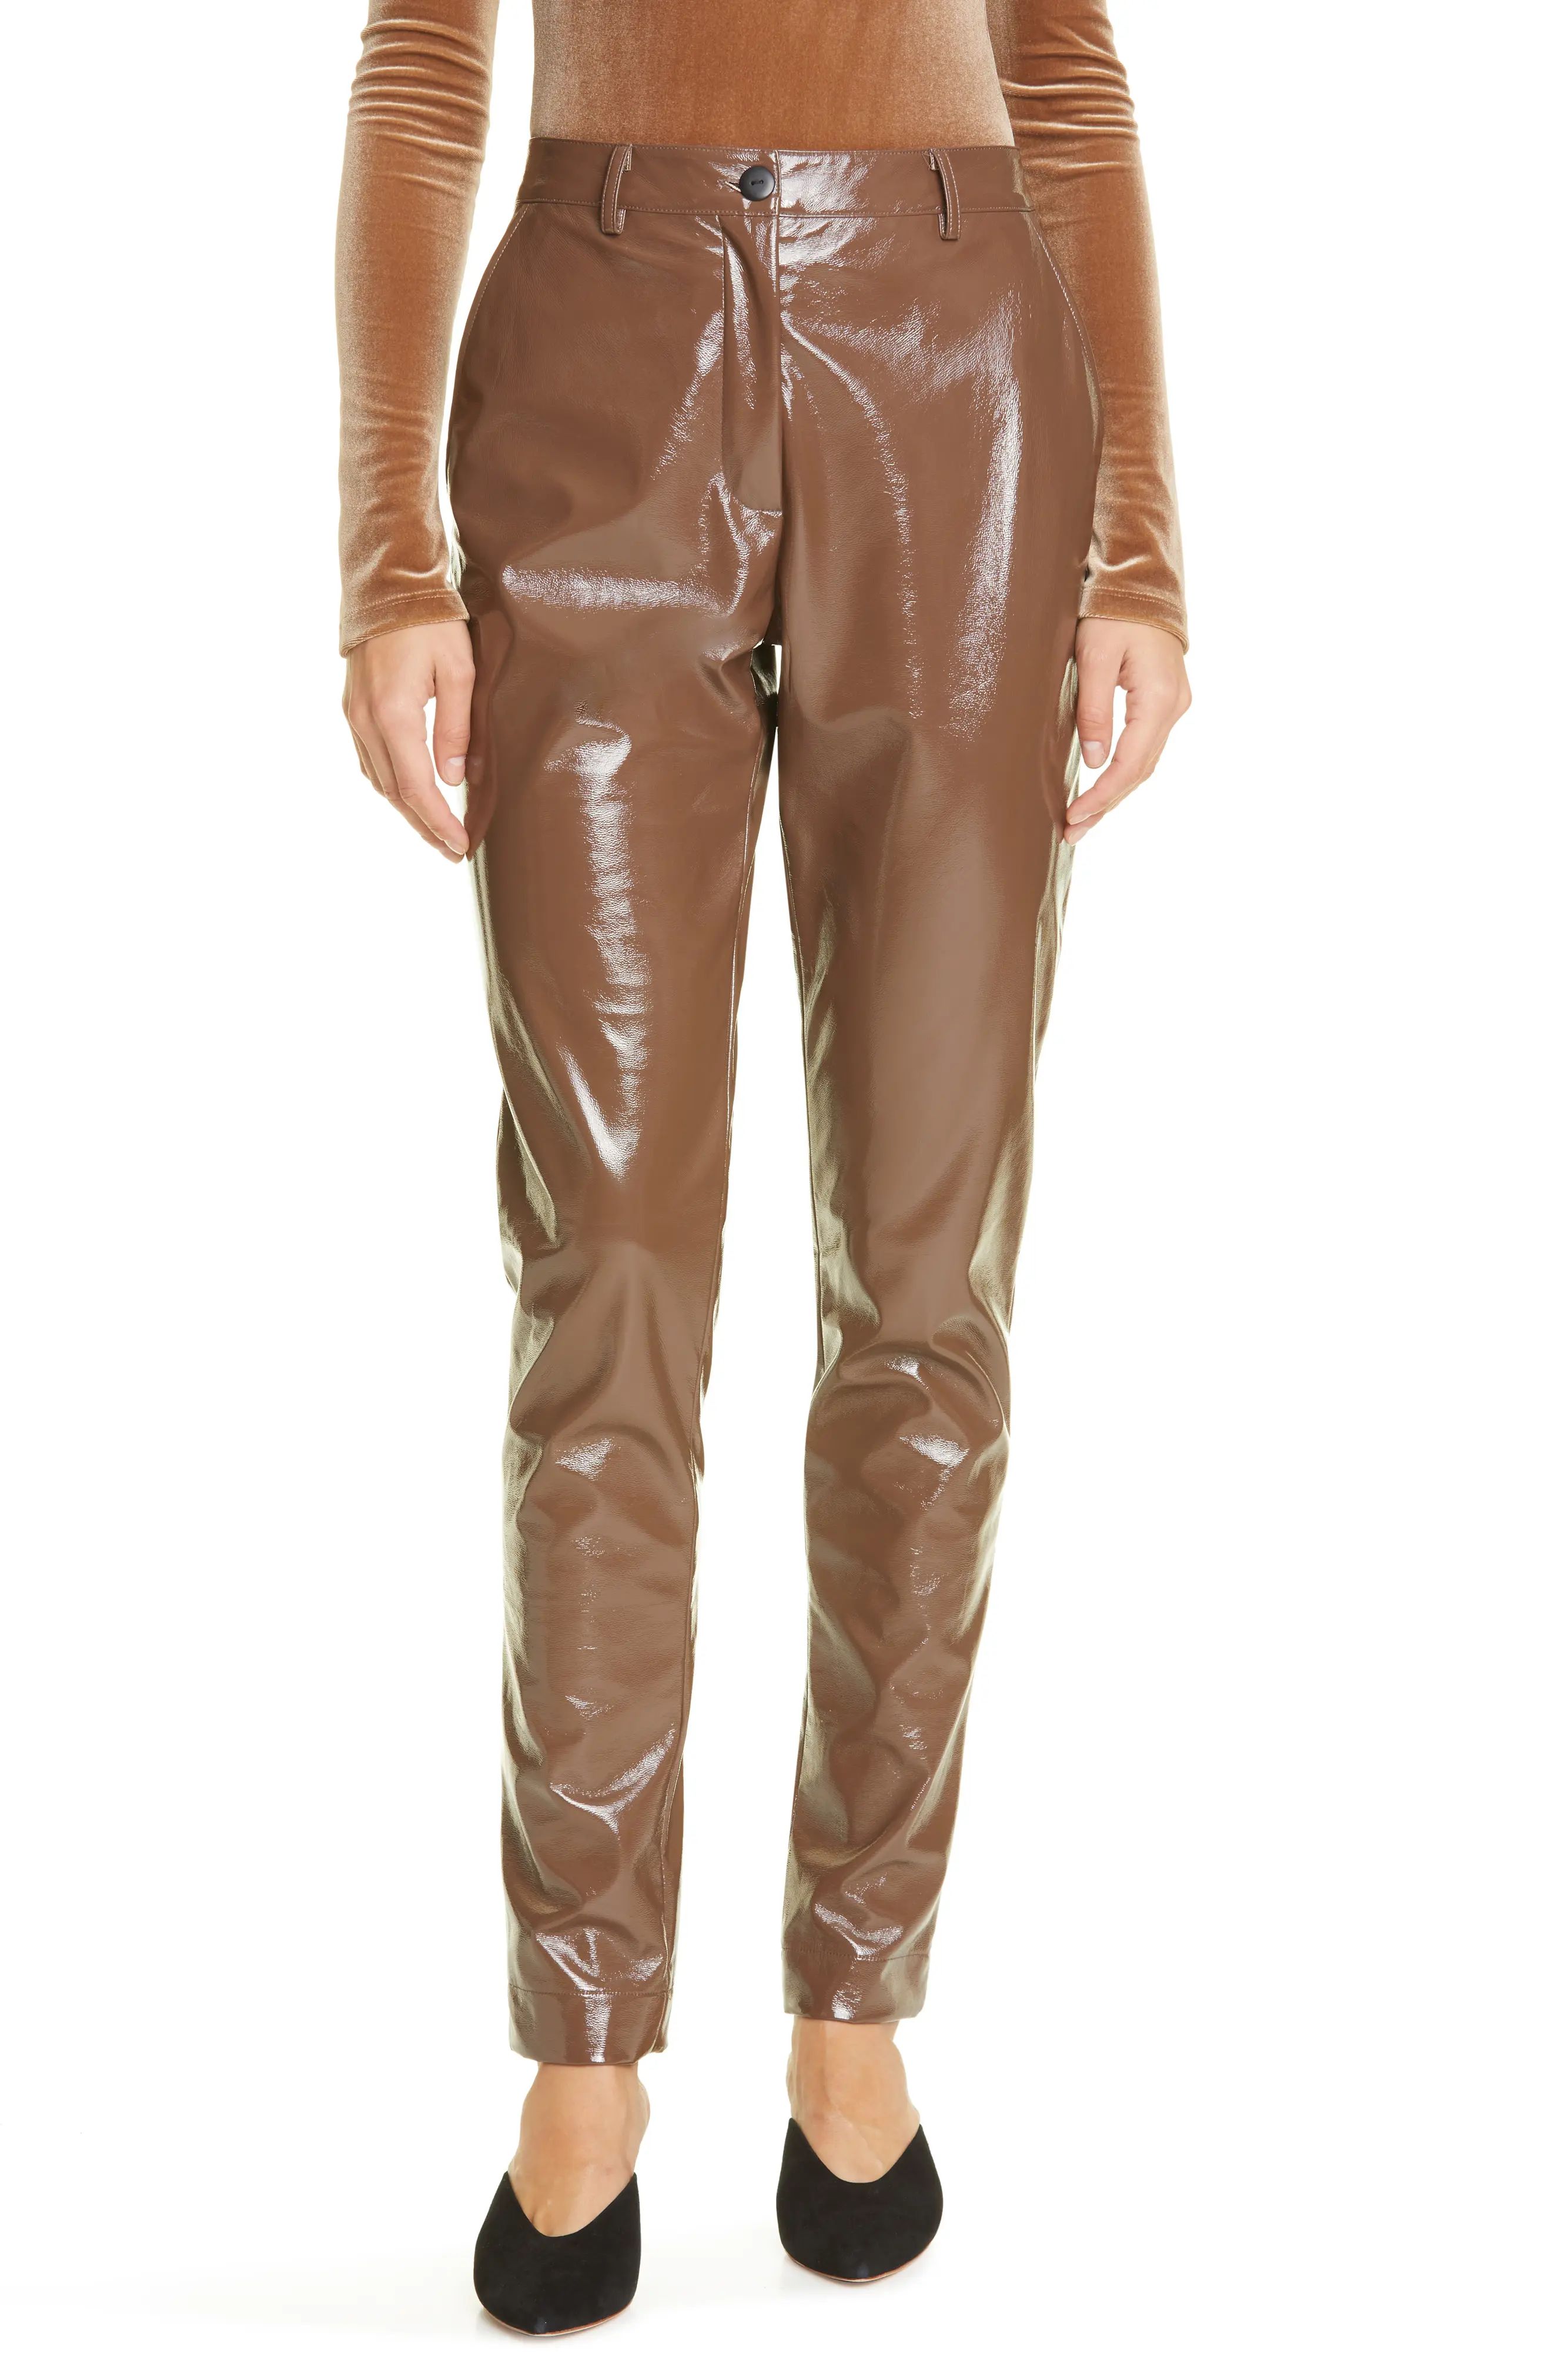 ALIX NYC Loring Faux Leather Pants, Size 12 in Acorn at Nordstrom | Nordstrom